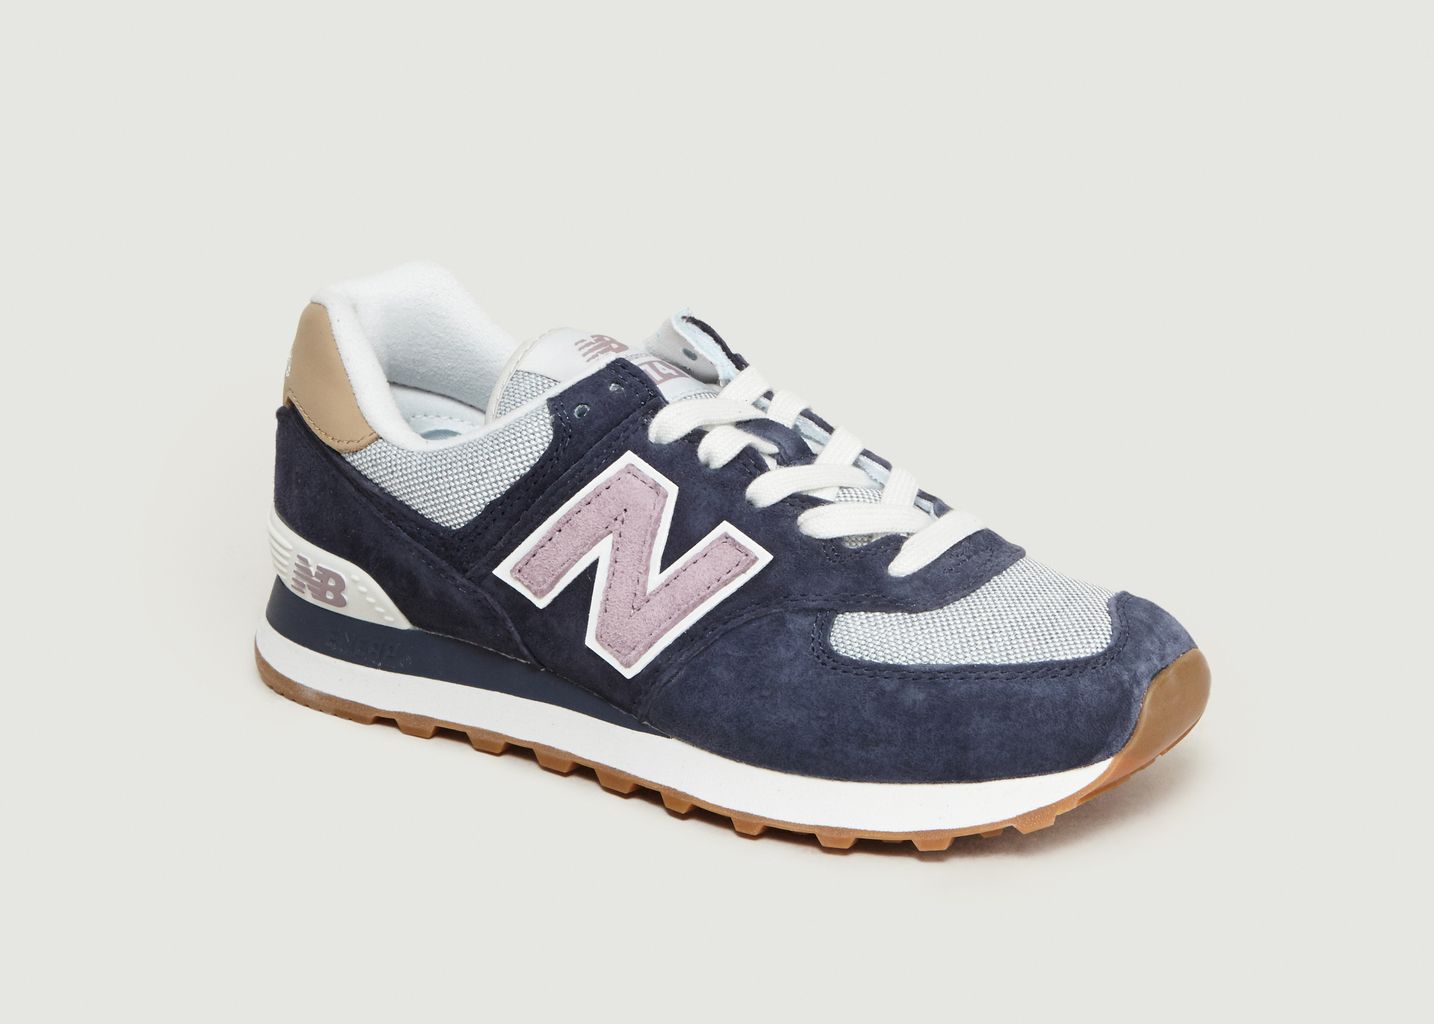 New Balance Wl 574 Navy Online Sale, UP TO 50% OFF